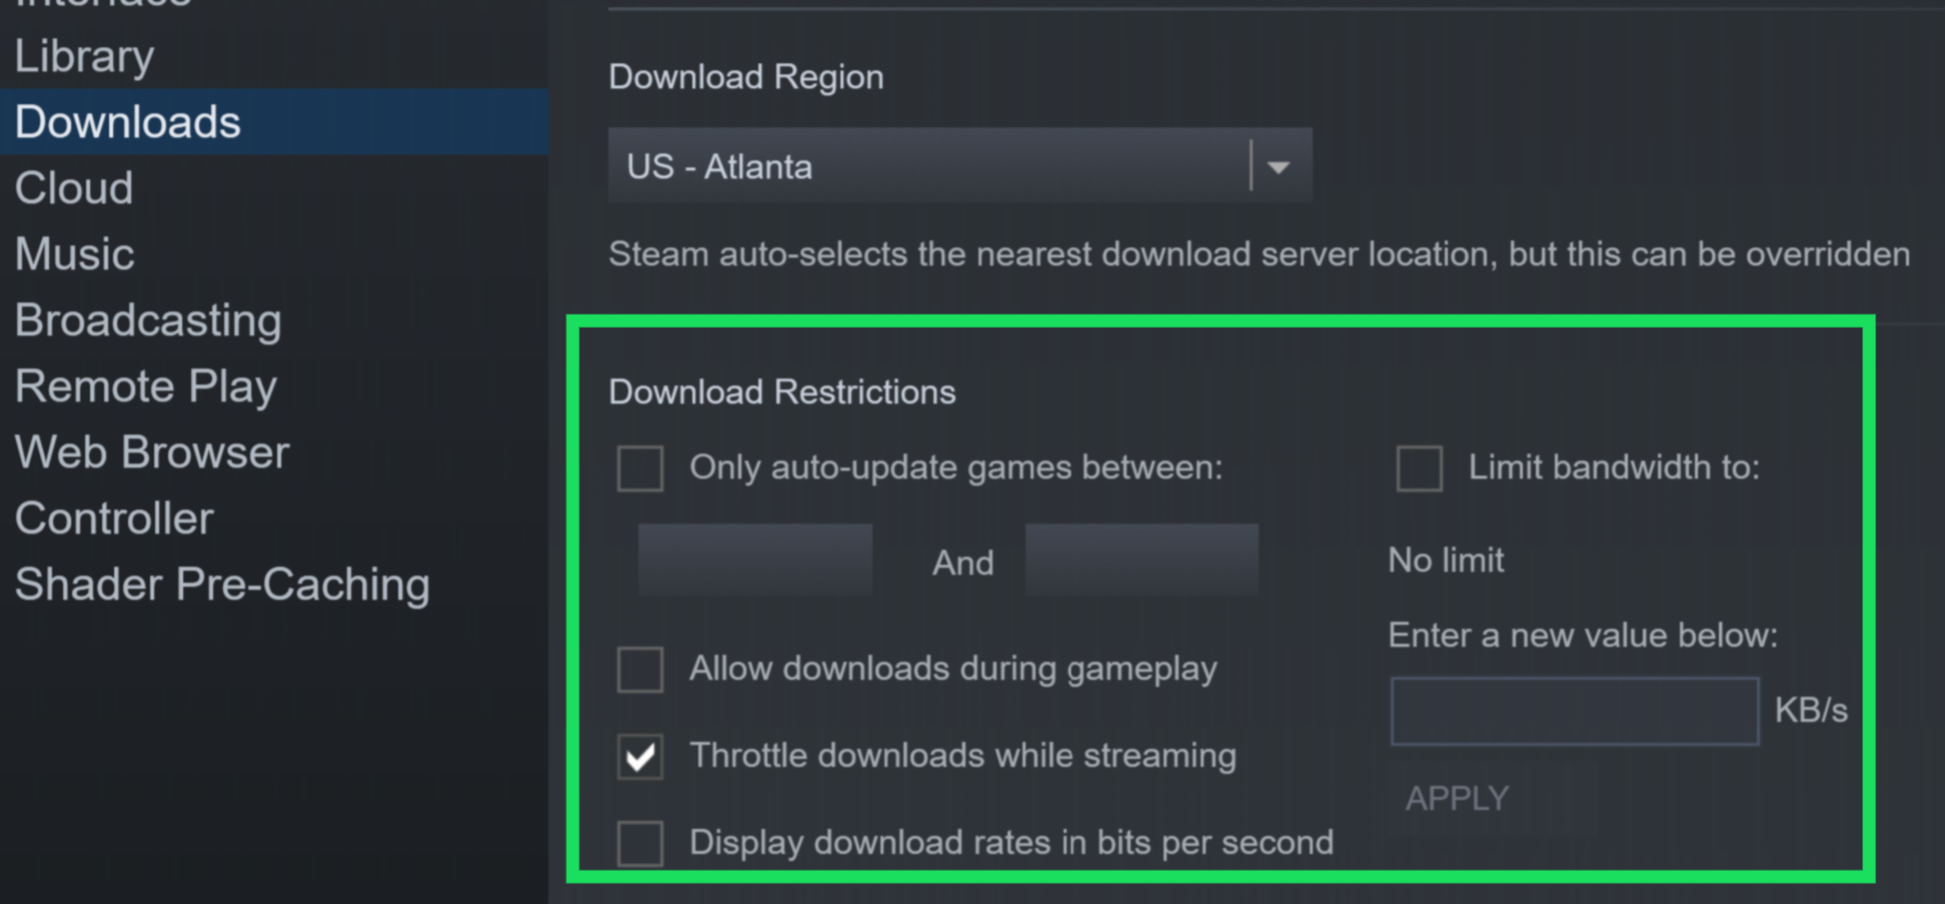 How to Fix Slow Download Speed in Epic Games Launcher on Windows